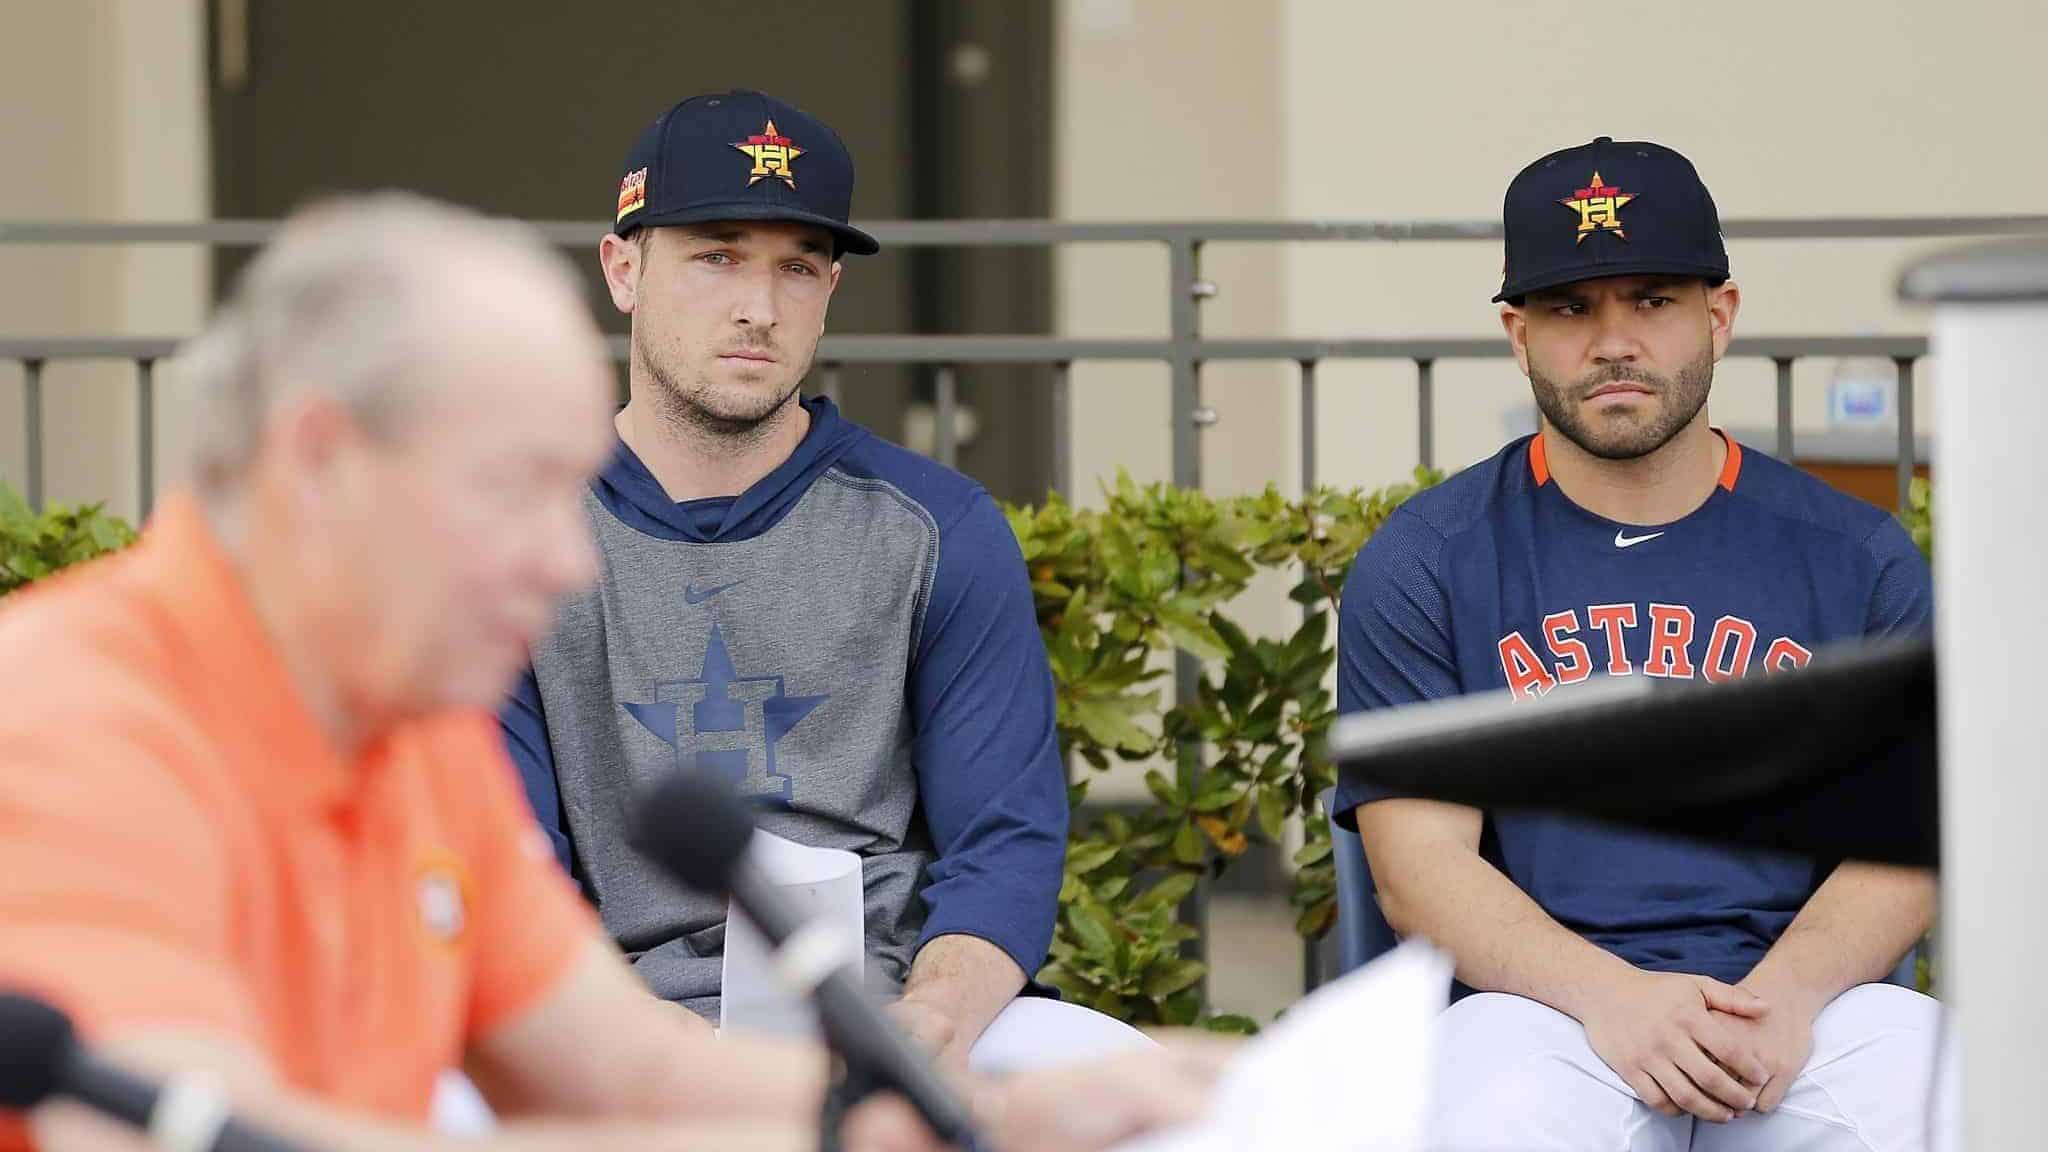 WEST PALM BEACH, FLORIDA - FEBRUARY 13: Alex Bregman #2 and Jose Altuve #27 of the Houston Astros look on as owner Jim Crane reads a prepared statement during a press conference at FITTEAM Ballpark of The Palm Beaches on February 13, 2020 in West Palm Beach, Florida.